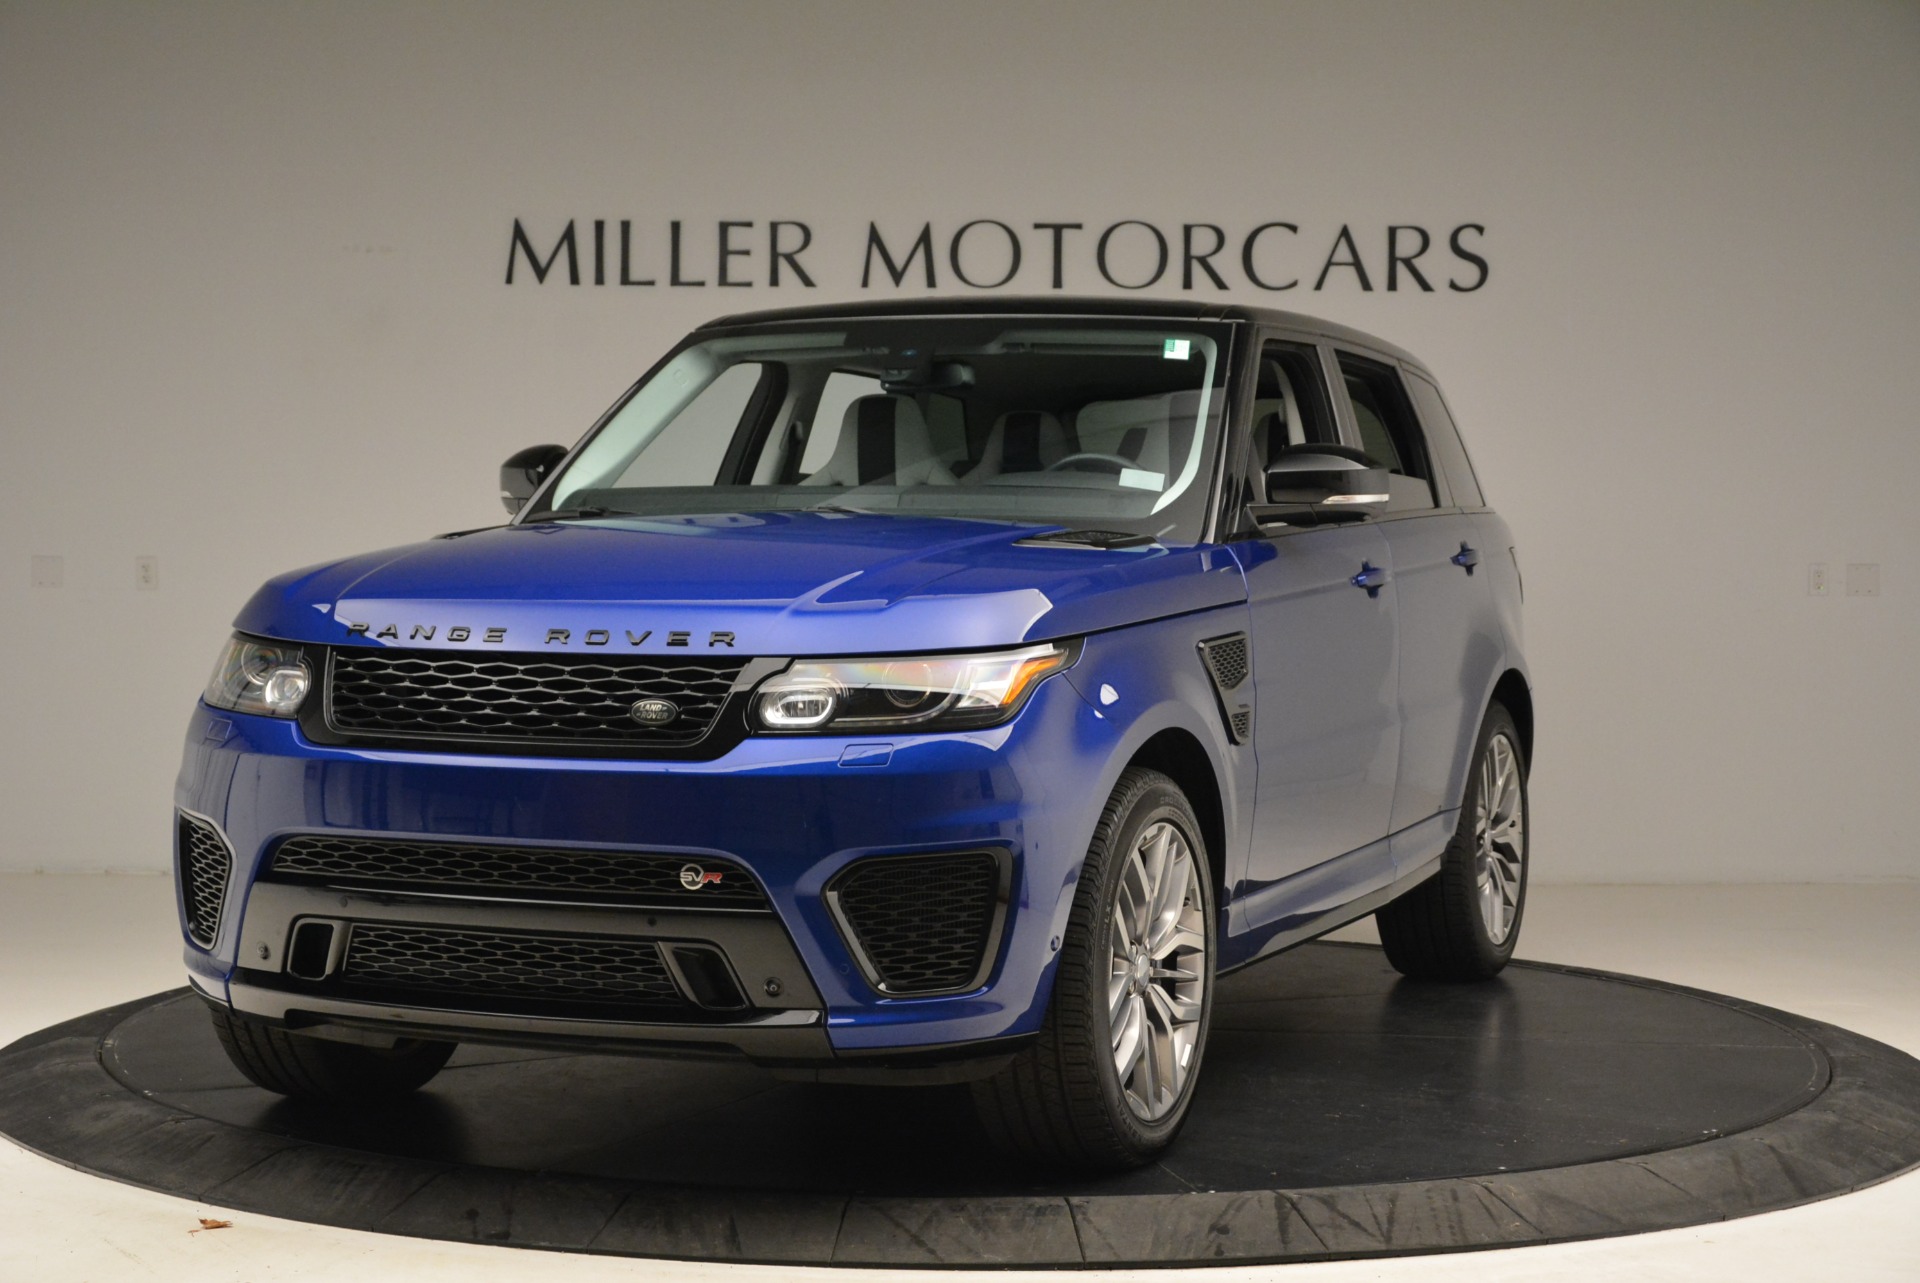 Used 2015 Land Rover Range Rover Sport SVR for sale Sold at Bugatti of Greenwich in Greenwich CT 06830 1